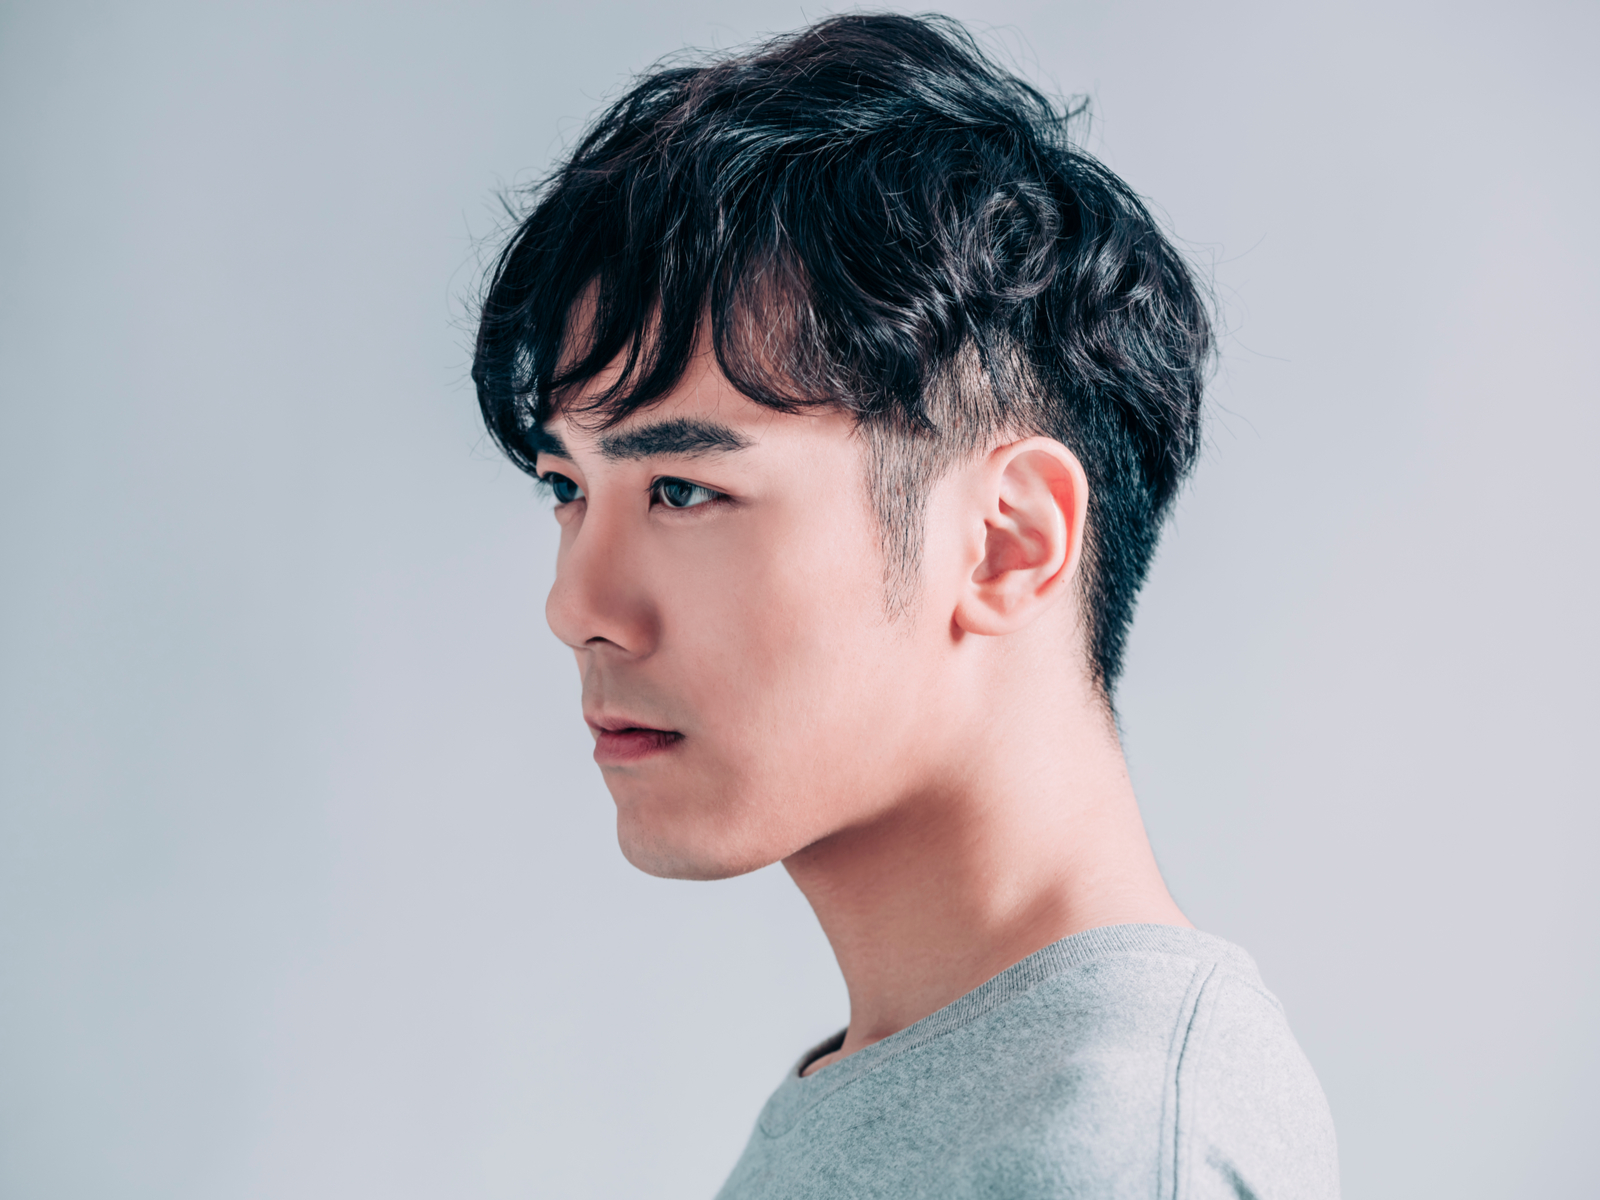 Photo of one of the best kpop hairstyles, the Messy Two Block Cut, pictured on a guy in a grey shirt